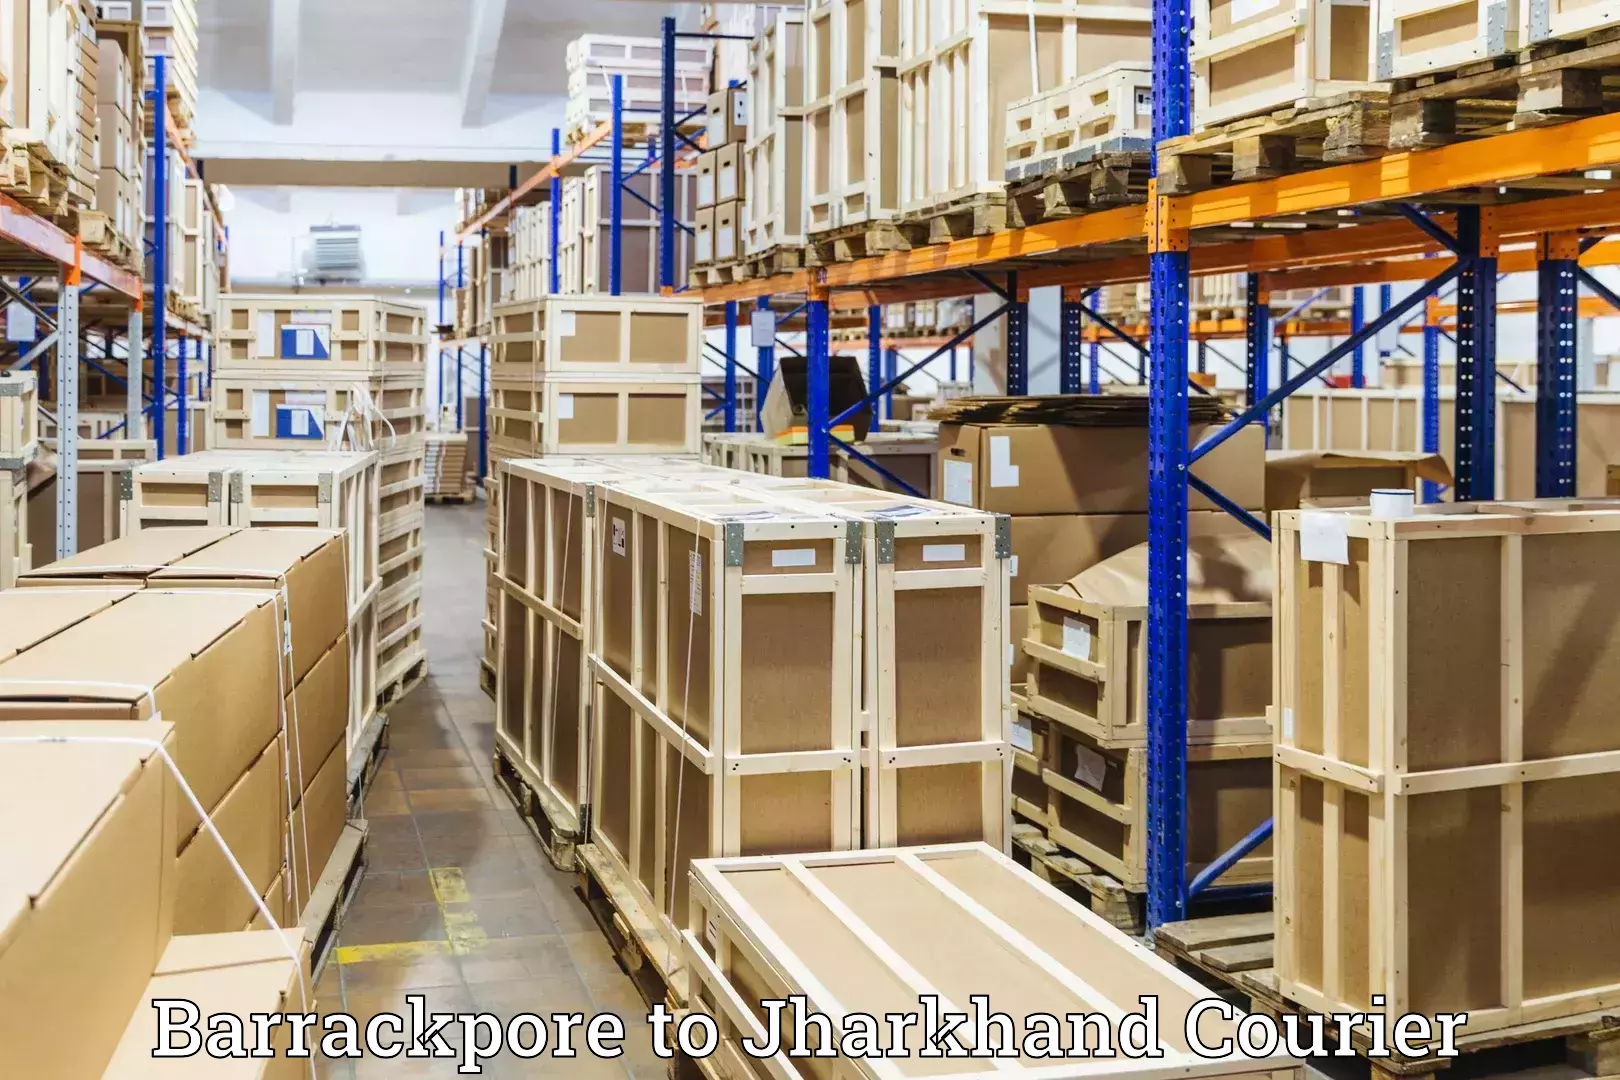 Luggage shipment specialists Barrackpore to Chandil